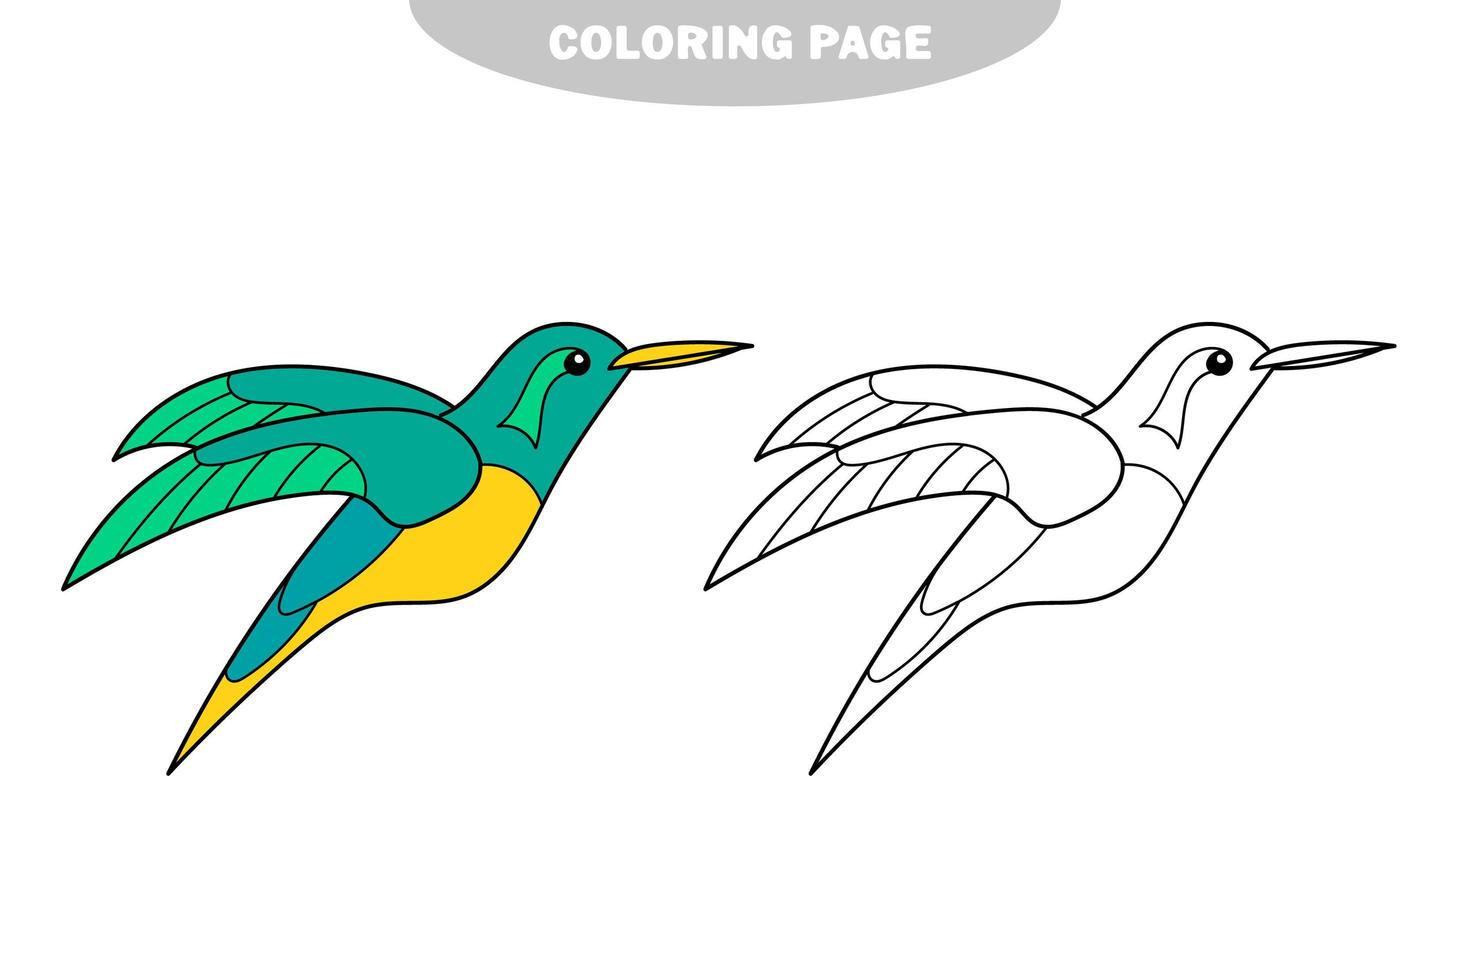 Simple coloring page. With Funny little hummingbird. Educational children game vector